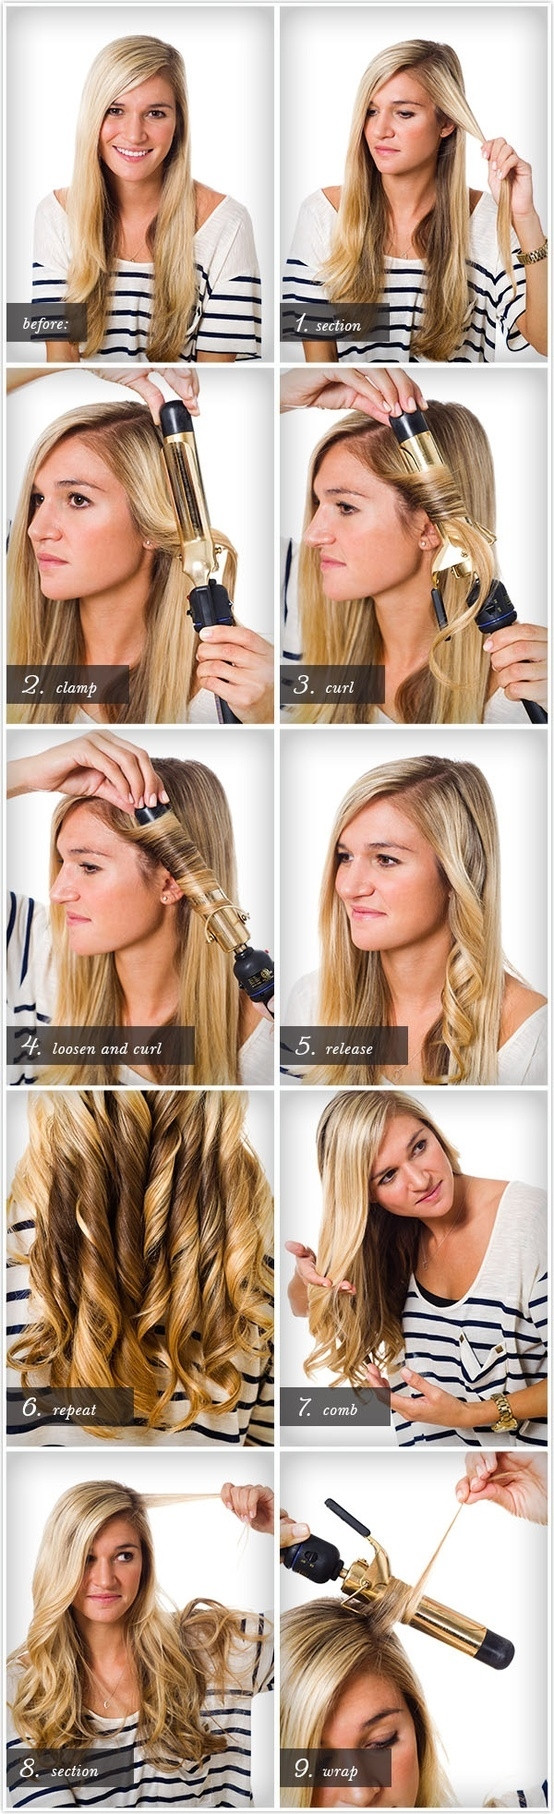 DIY Curly Hair
 DIY Hair Curls s and for